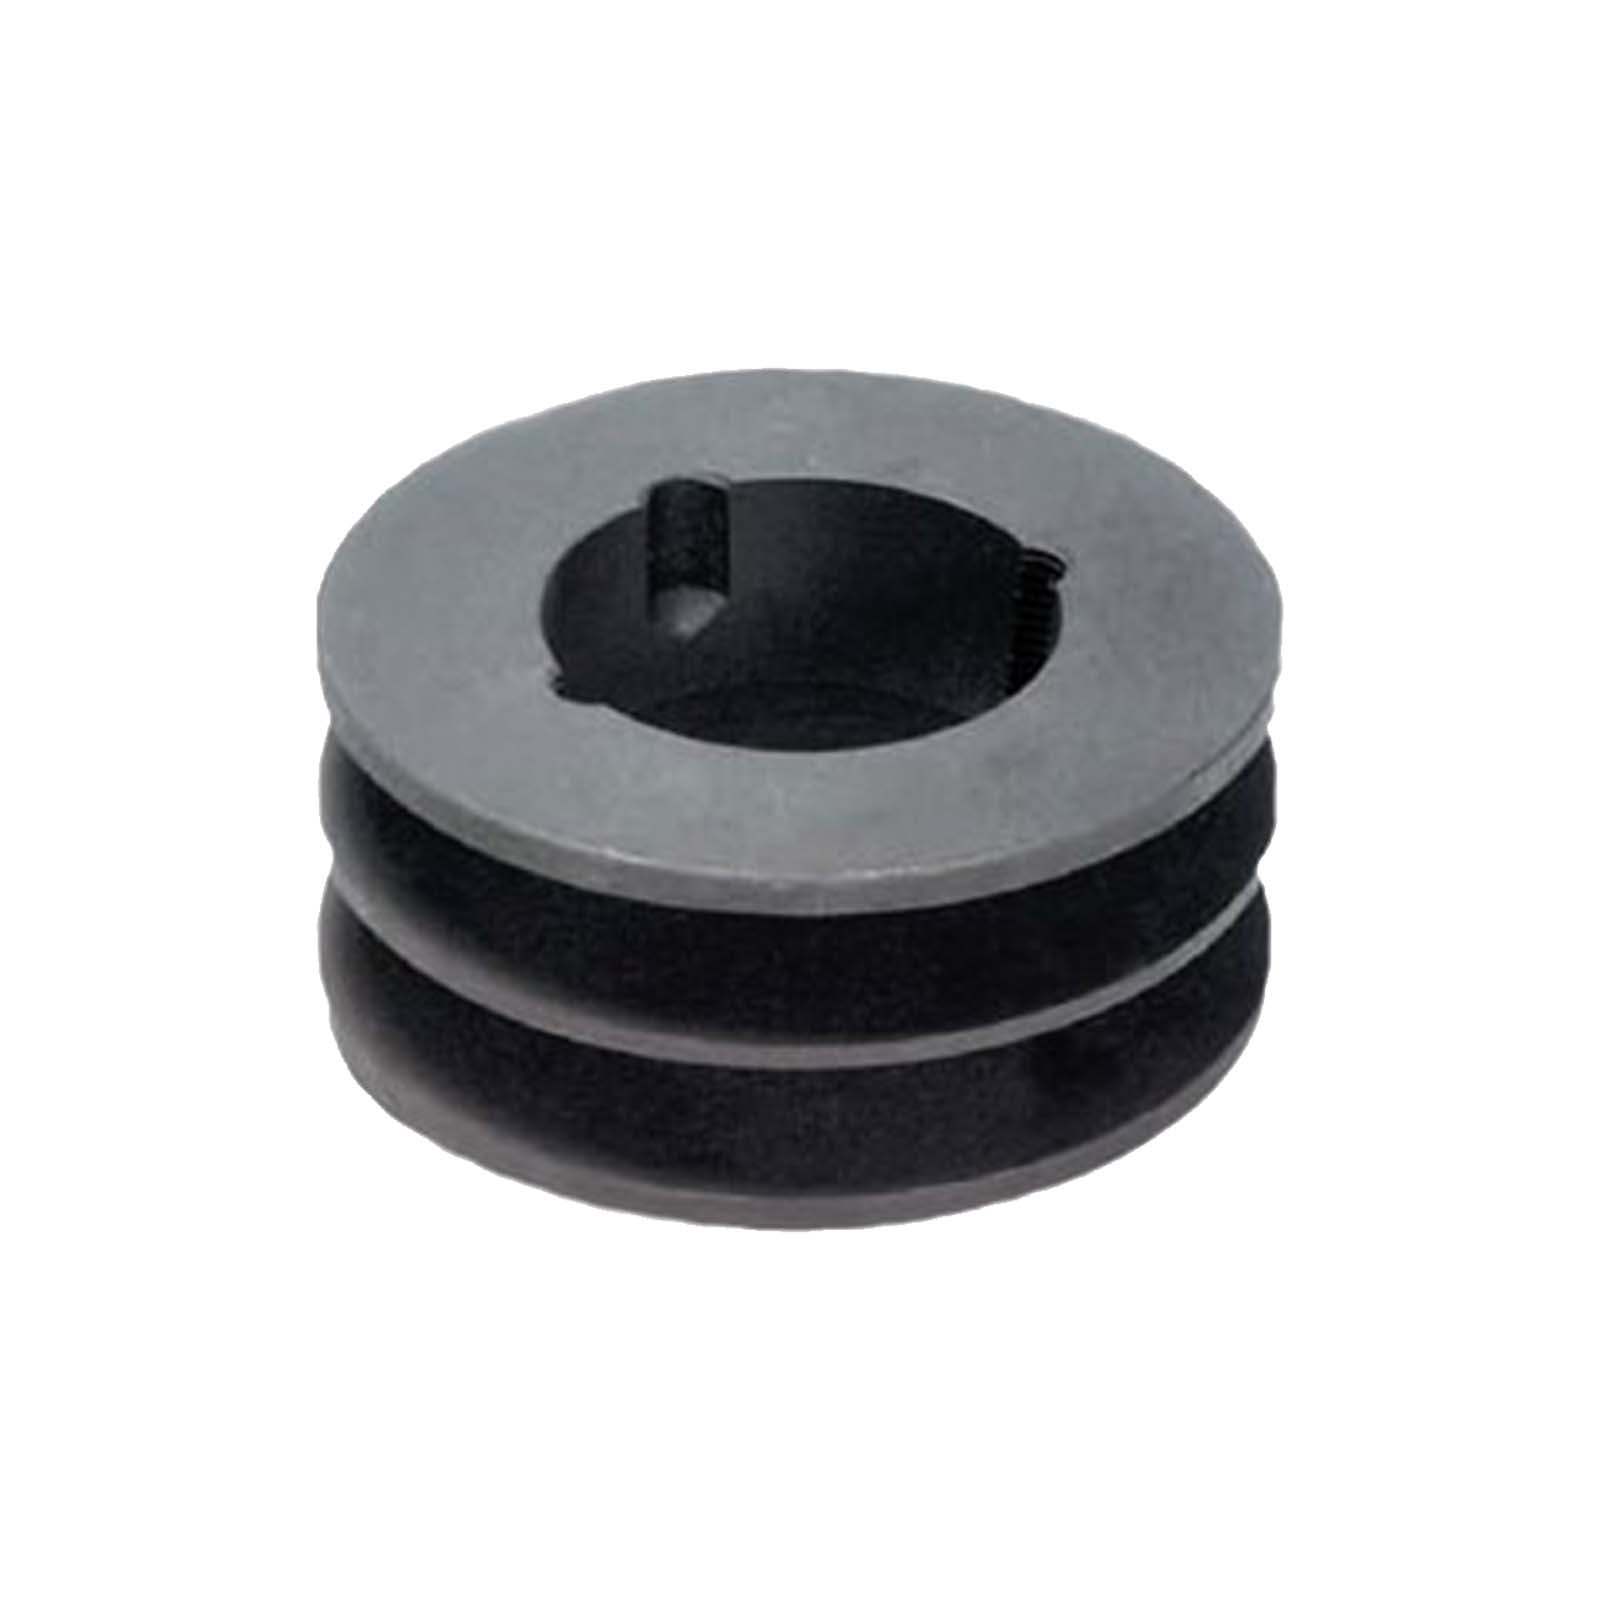 75122 V-Belt Pulley Belt Pulley SPZ 75 x 1 Jack 1108 with 22 mm Bore 